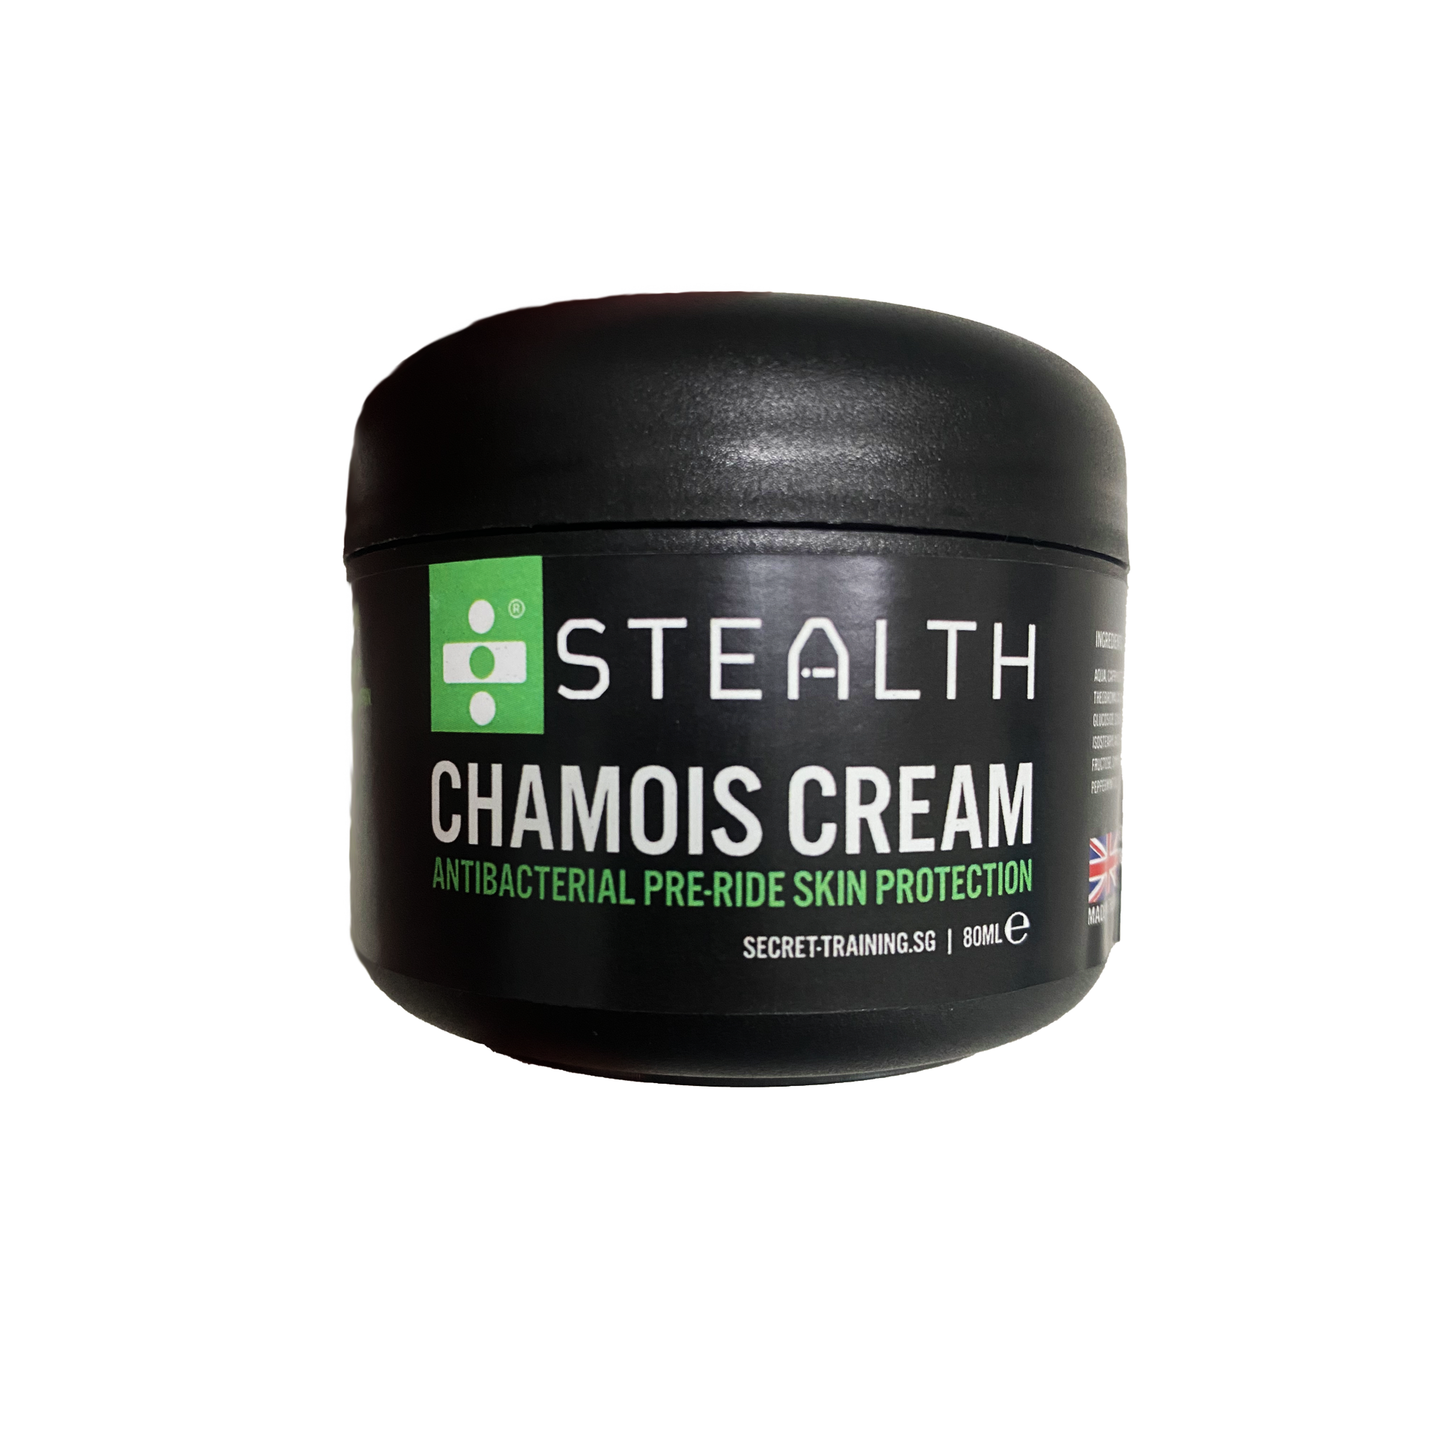 Chamois Cream by STEALTH